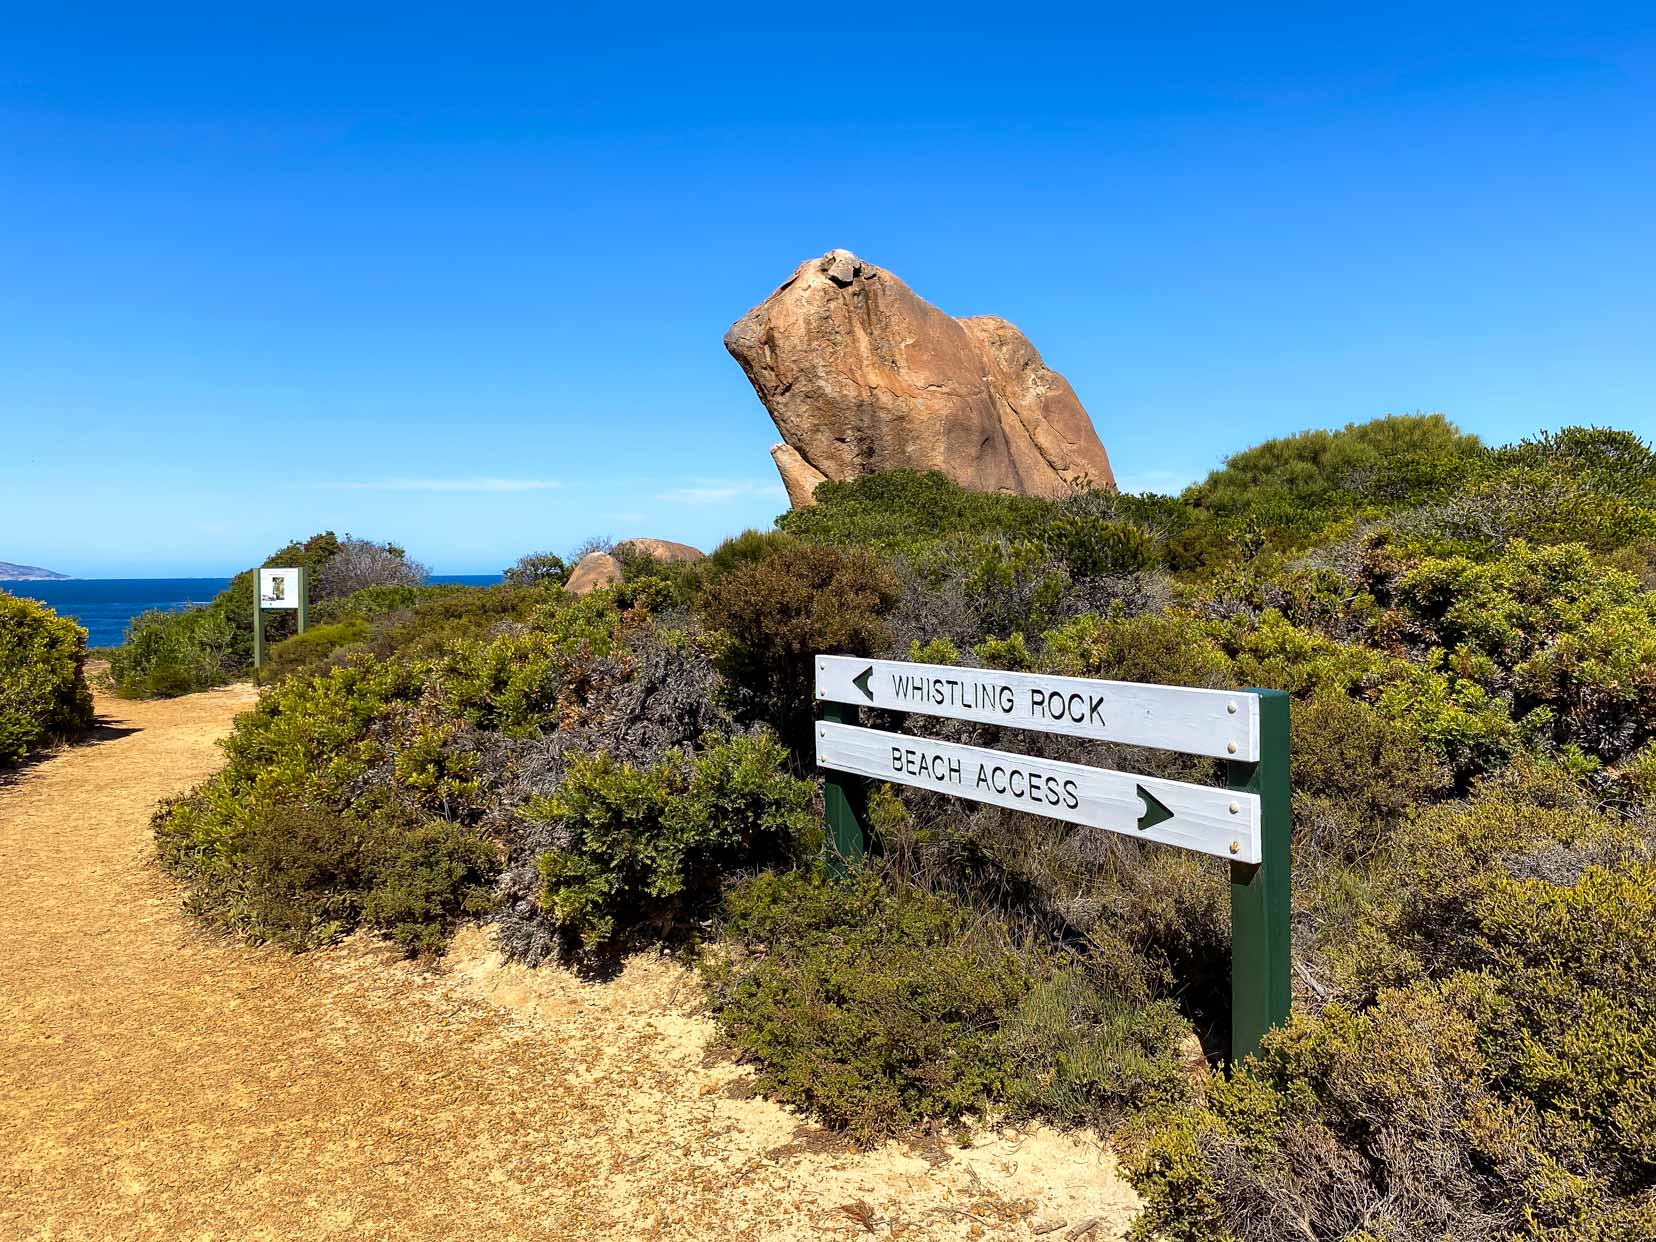 Whistling Rock - a large granite rock leaning towards the ocean surrounded by low bushland scrub